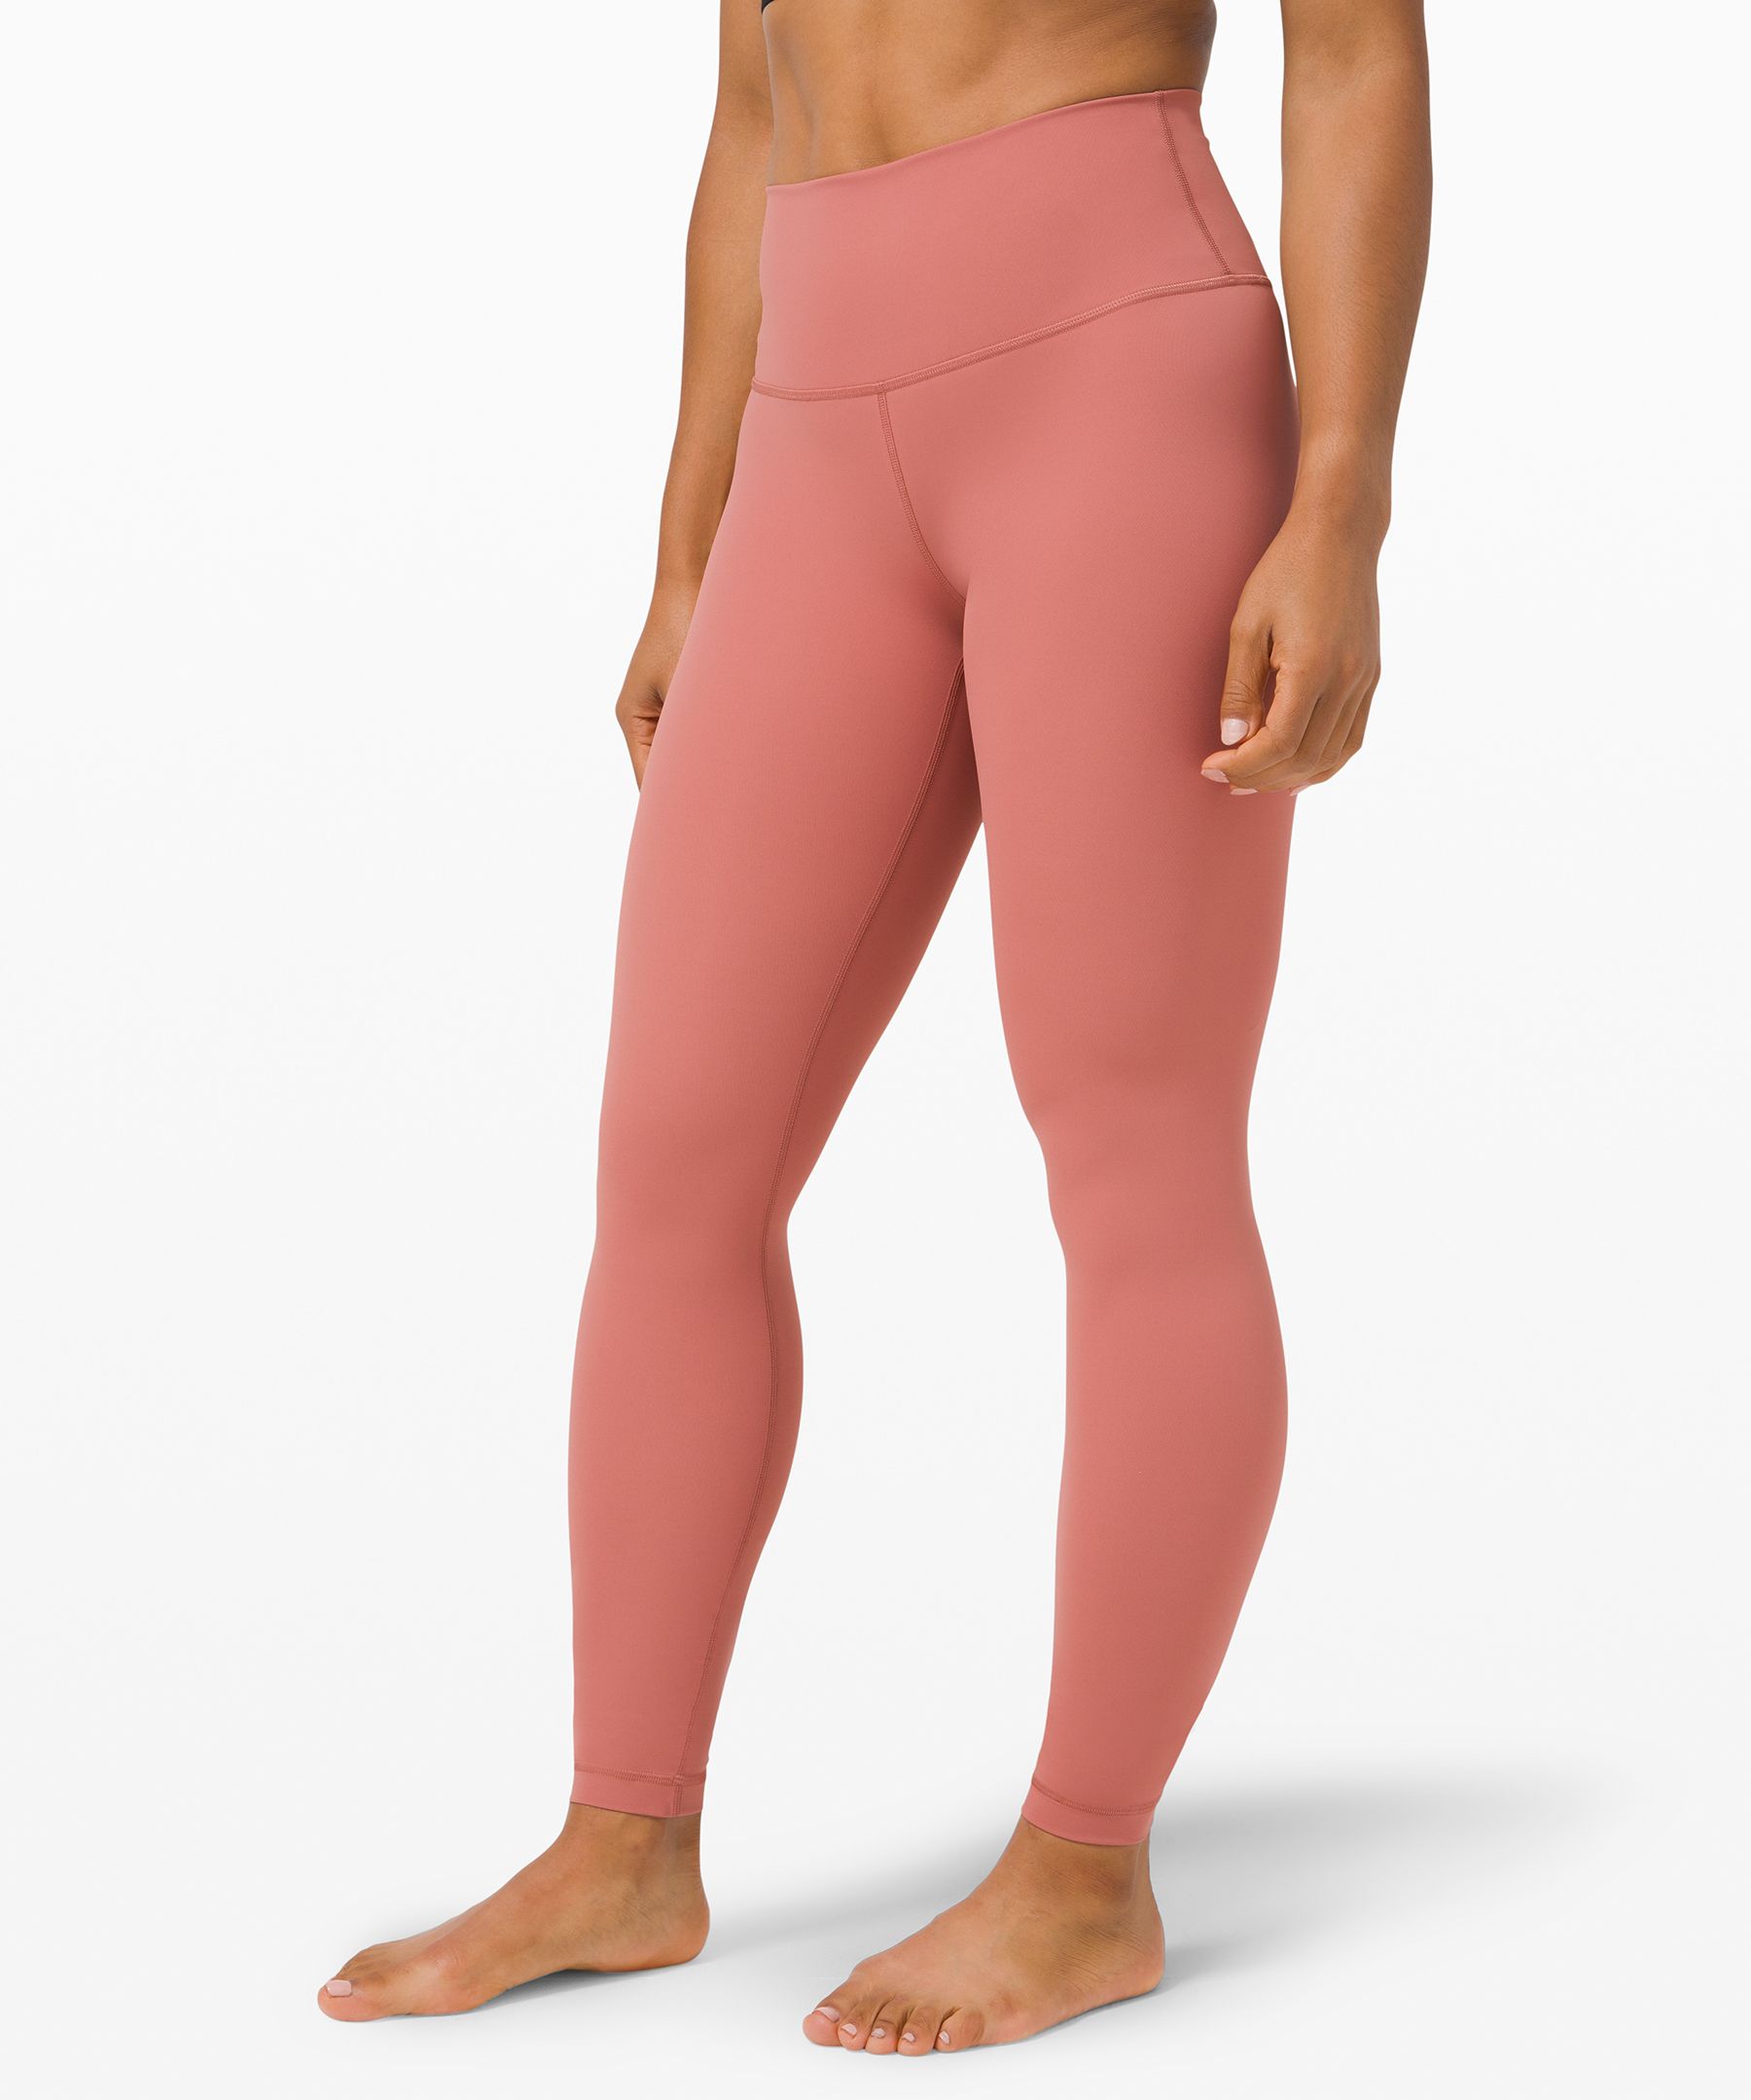 Lululemon Wunder Under High-Rise Tight 28 *Luxtreme - Incognito